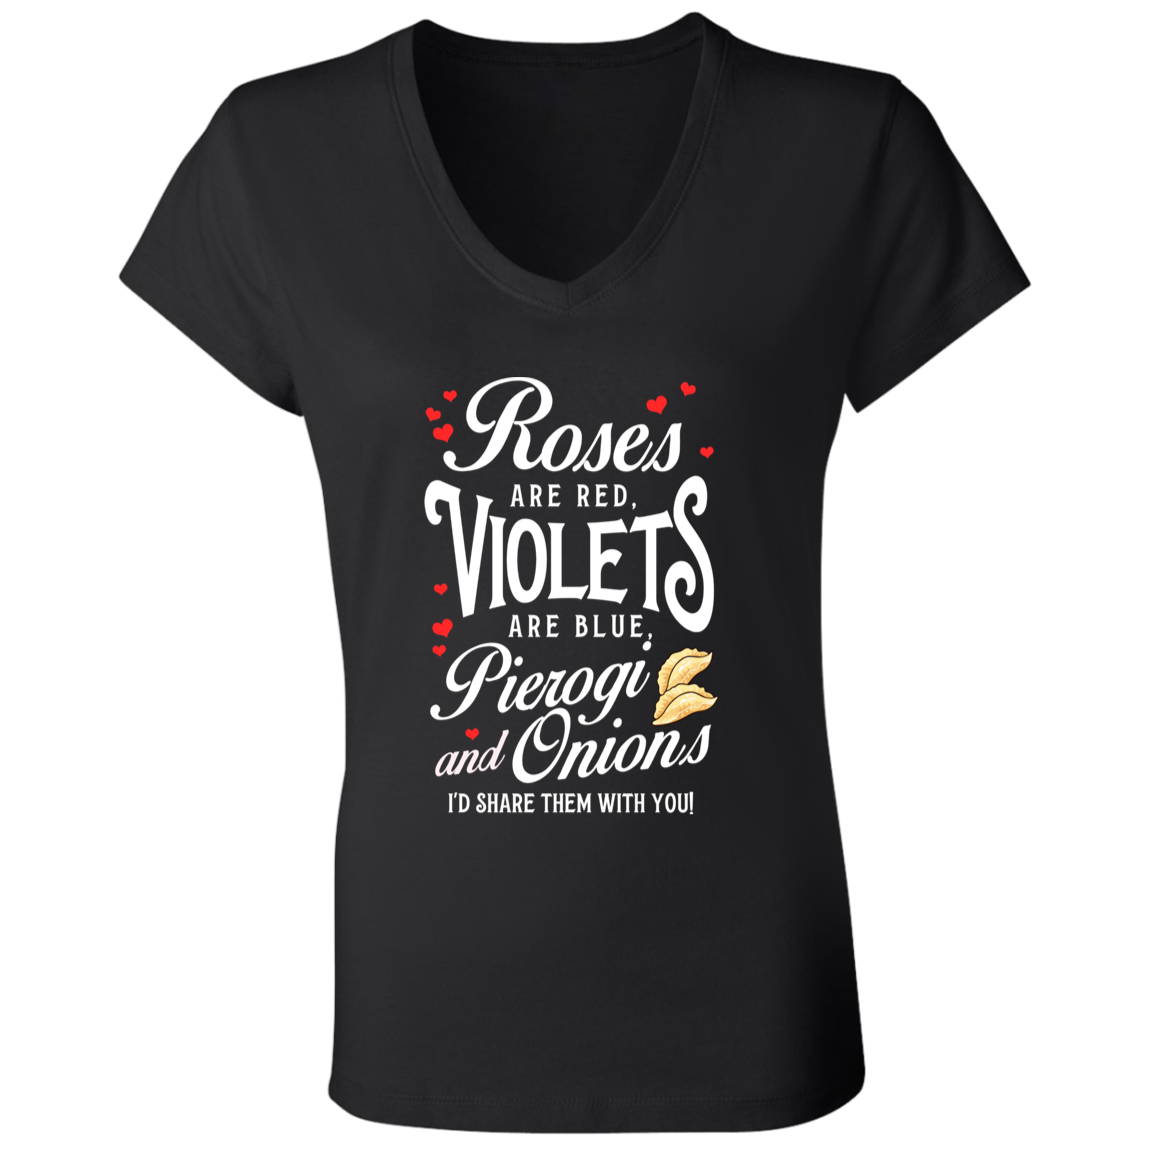 Roses Are Red Violets Are Blue Pierogi And Onions I'd Make Them For You Apparel CustomCat B6005 Ladies' Jersey V-Neck T-Shirt Black S